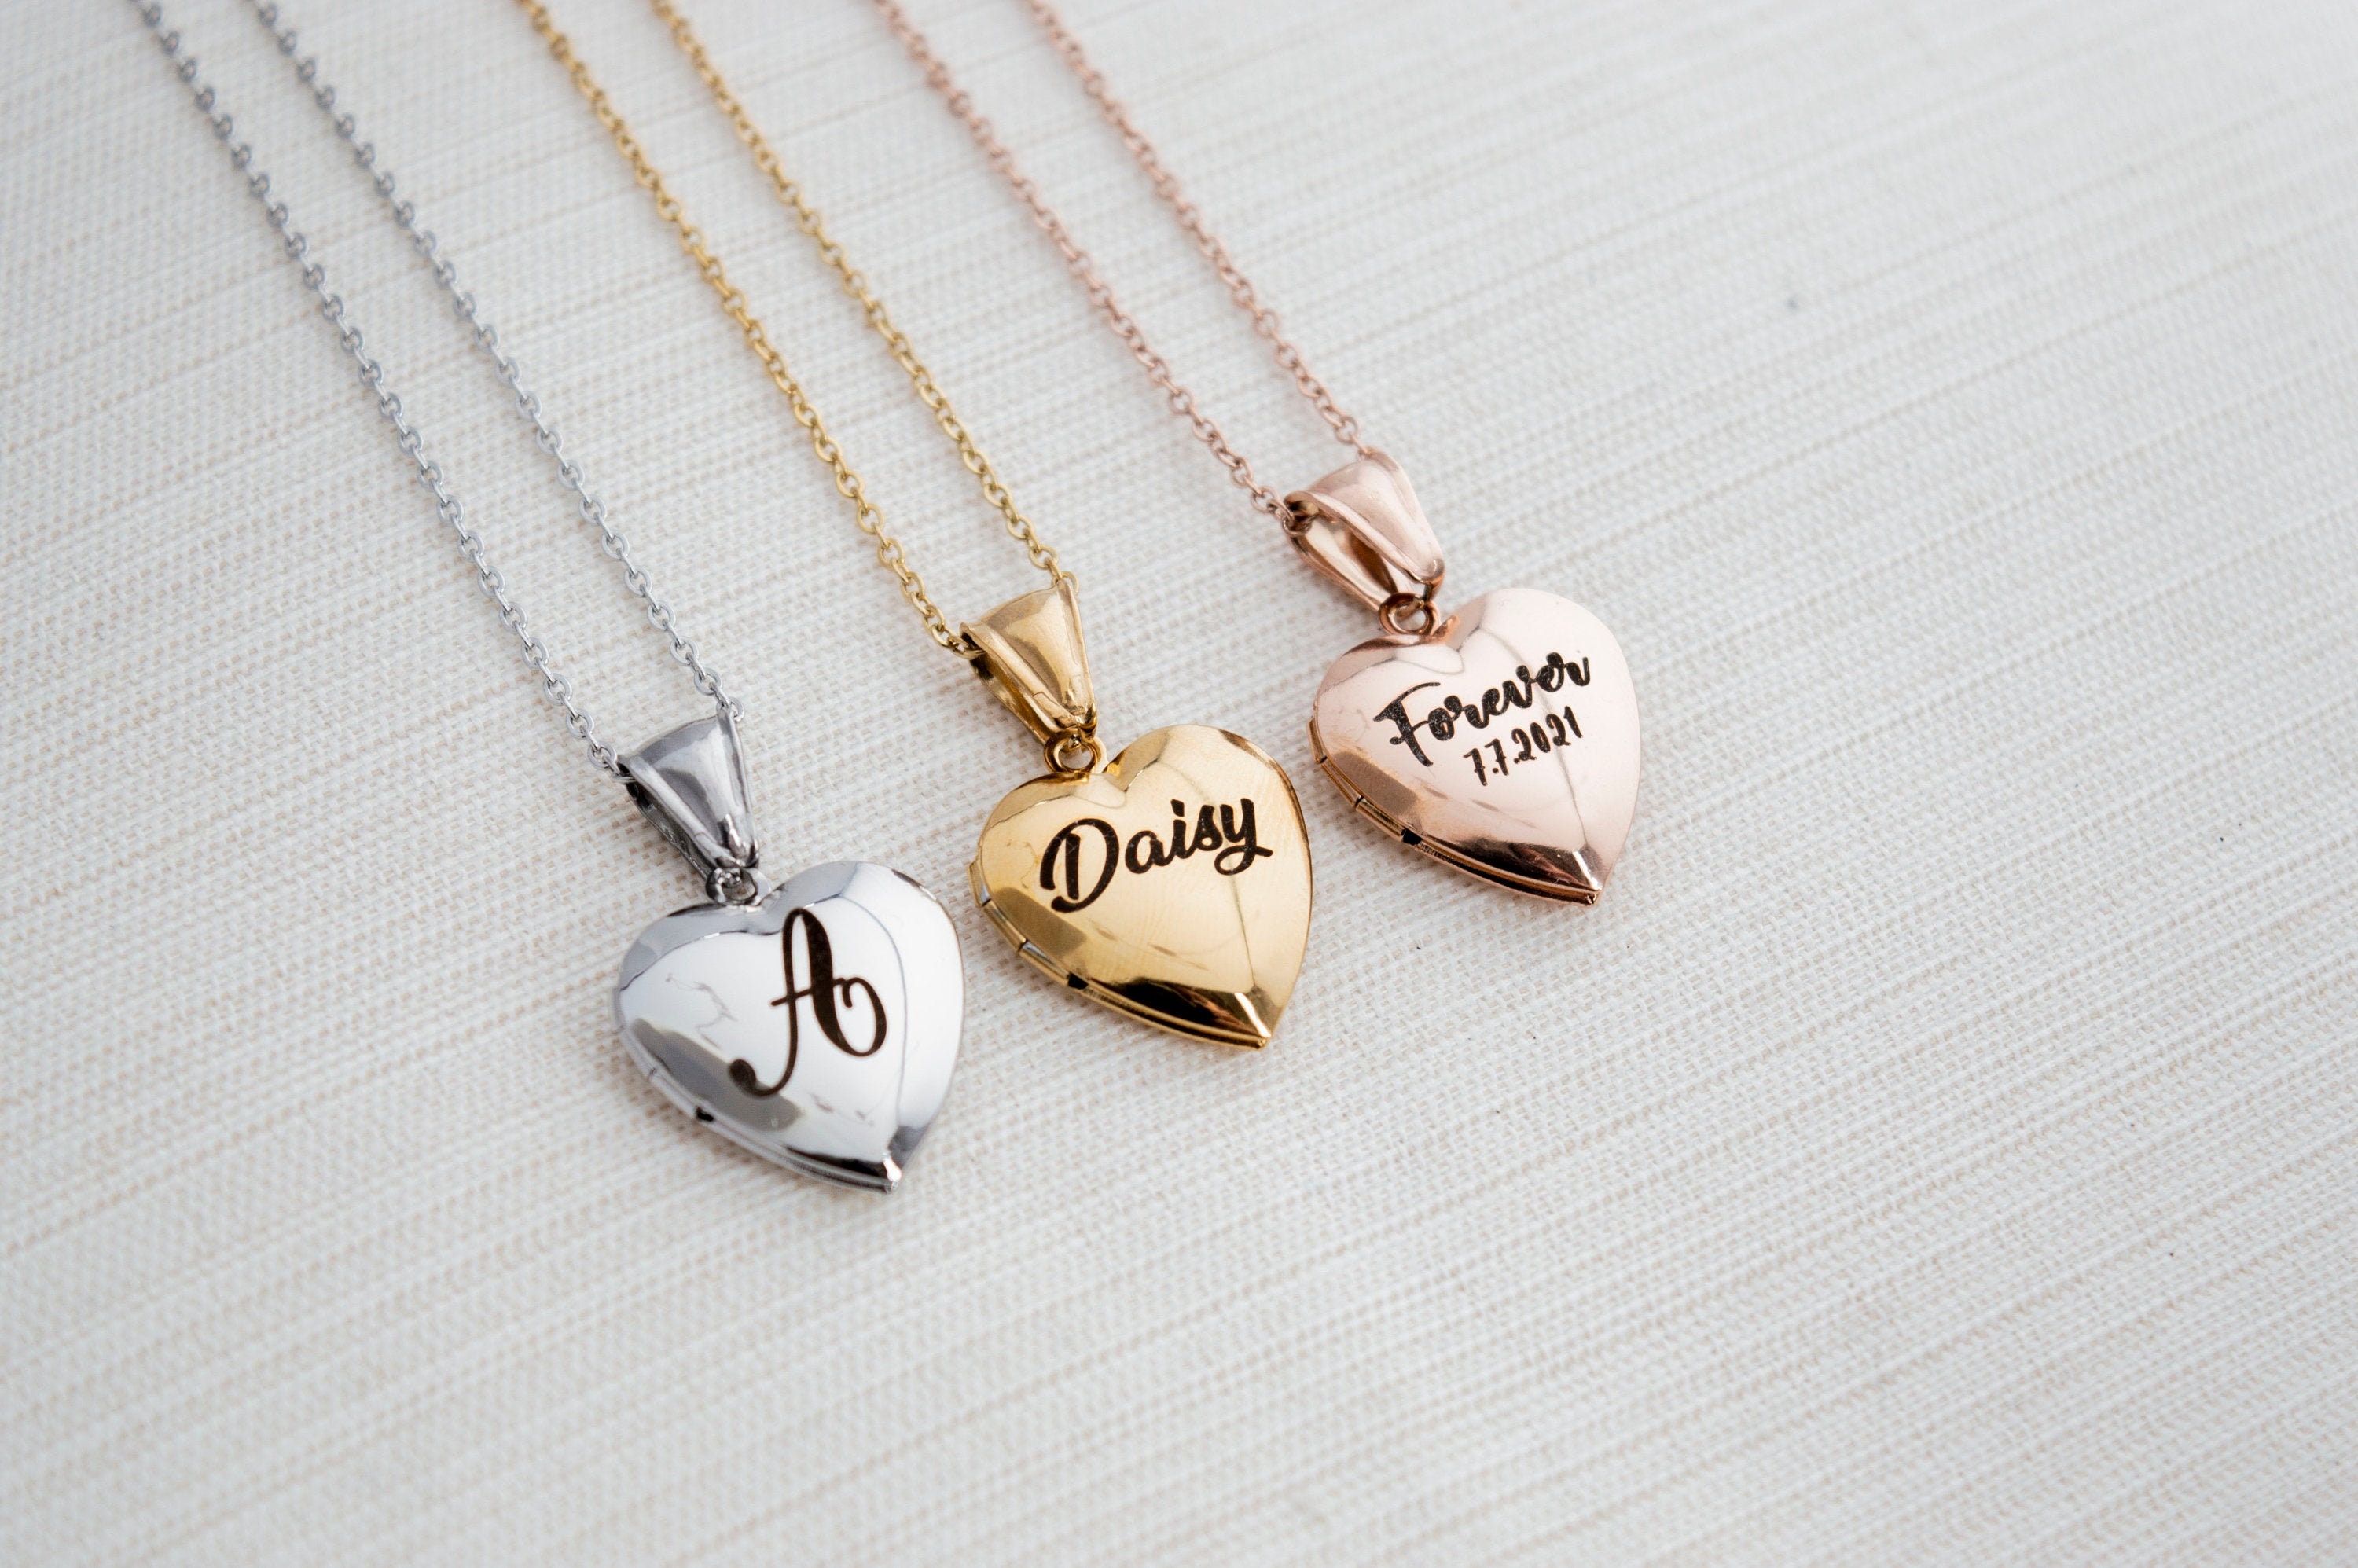 Actual handwriting engraved on Locket, in silver/rose/gold pendant – My-Whys